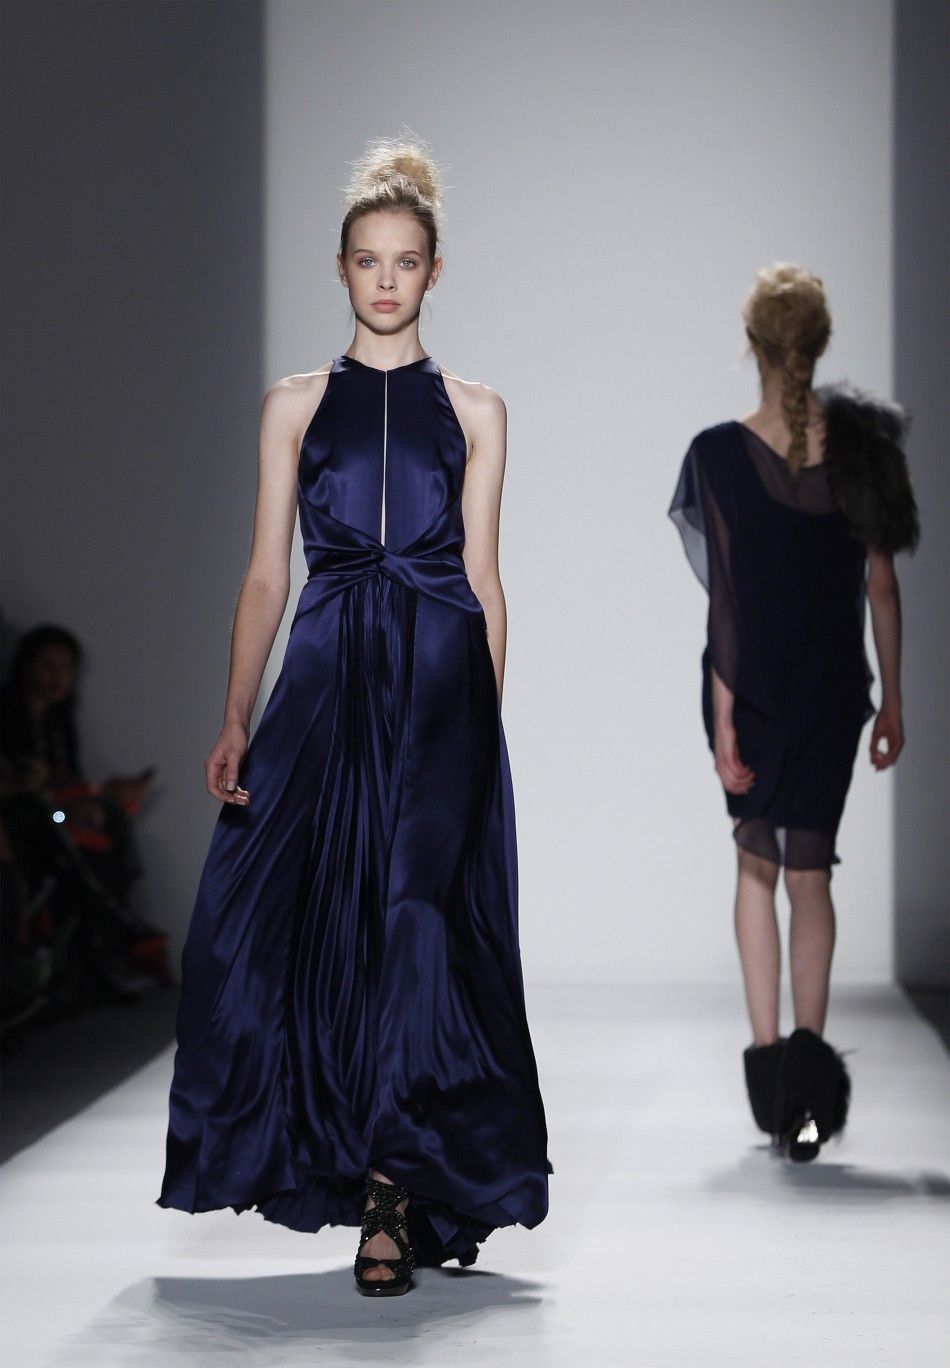 Best of New York Fashion Week 2012 Glamorous Evening Gowns and Chic Pumps PHOTOS